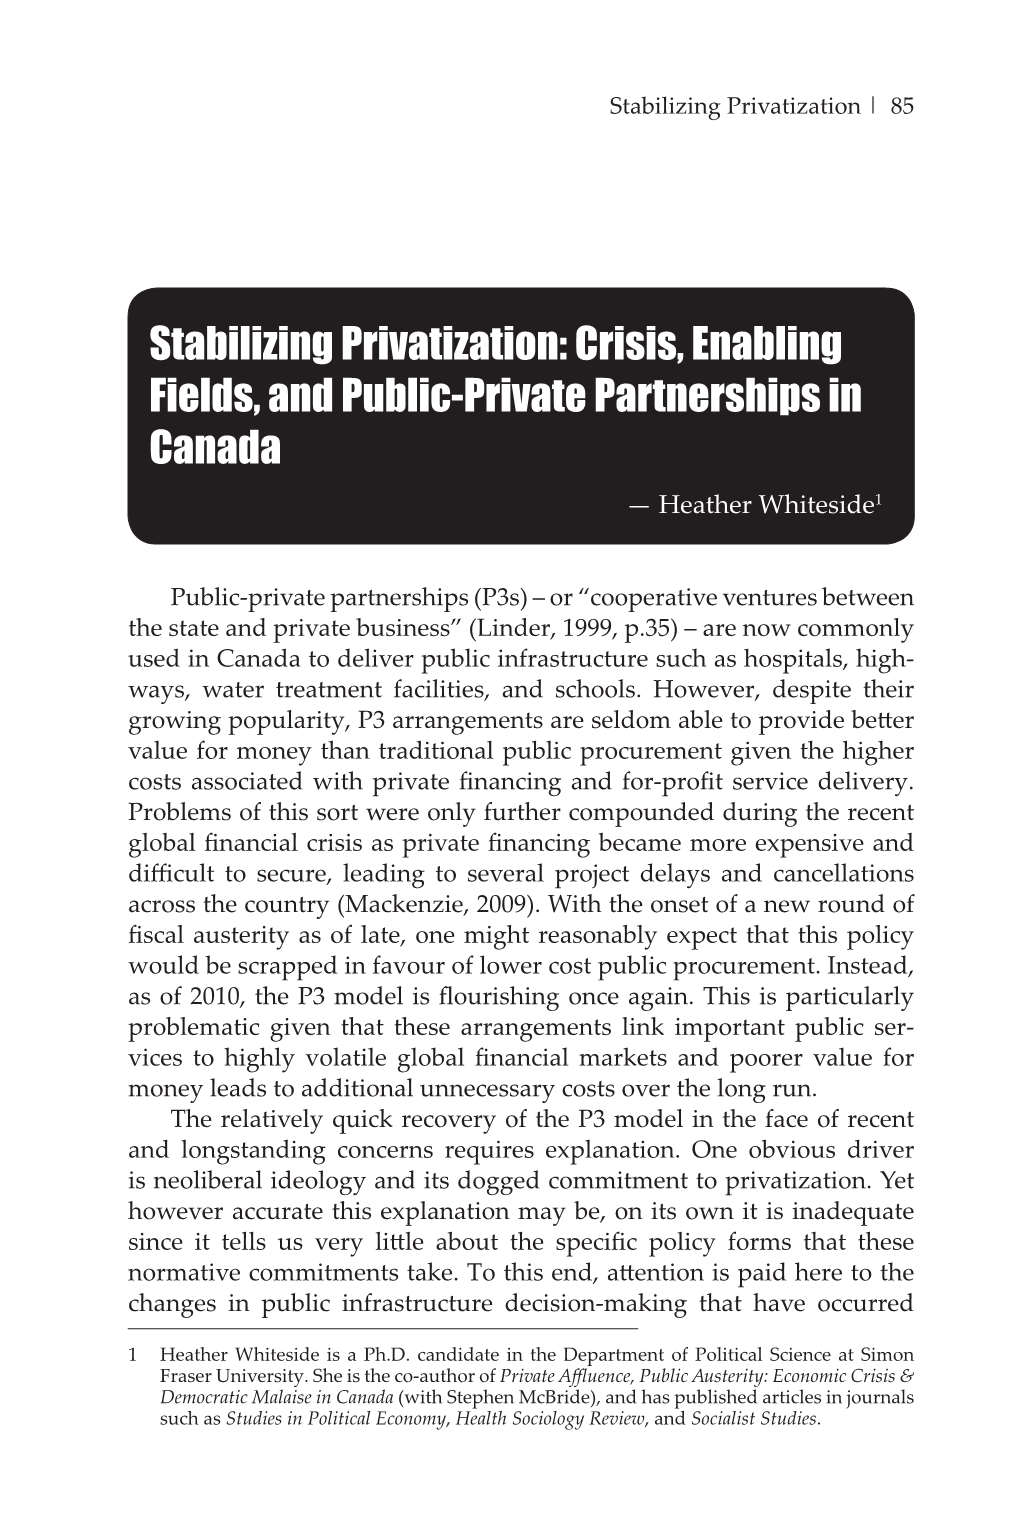 Crisis, Enabling Fields, and Public-Private Partnerships in Canada — Heather Whiteside1